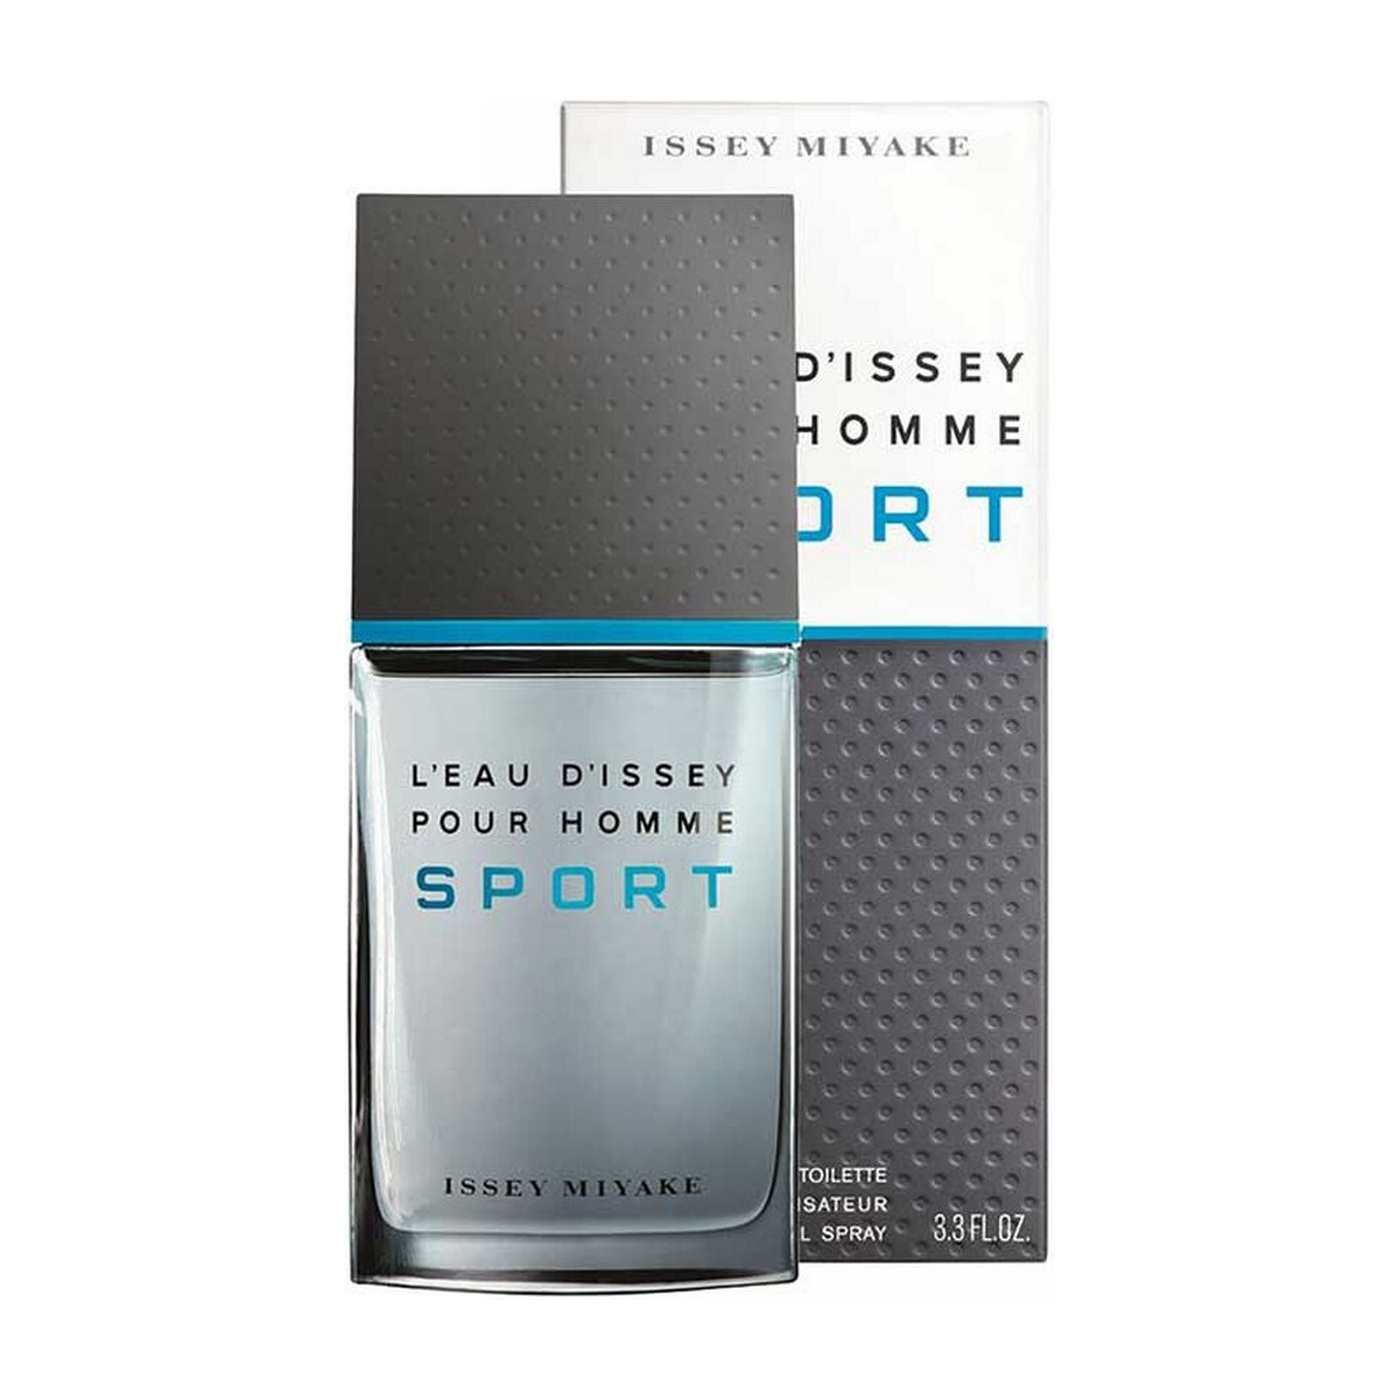 Pour homme sport. Issey Miyake l`Eau d`Issey Sport. L'Eau d'Issey pour homme Sport. Issey Miyake мужская l`Eau d`Issey pour homme. Issey Miyake l`Eau d`Issey мужской.